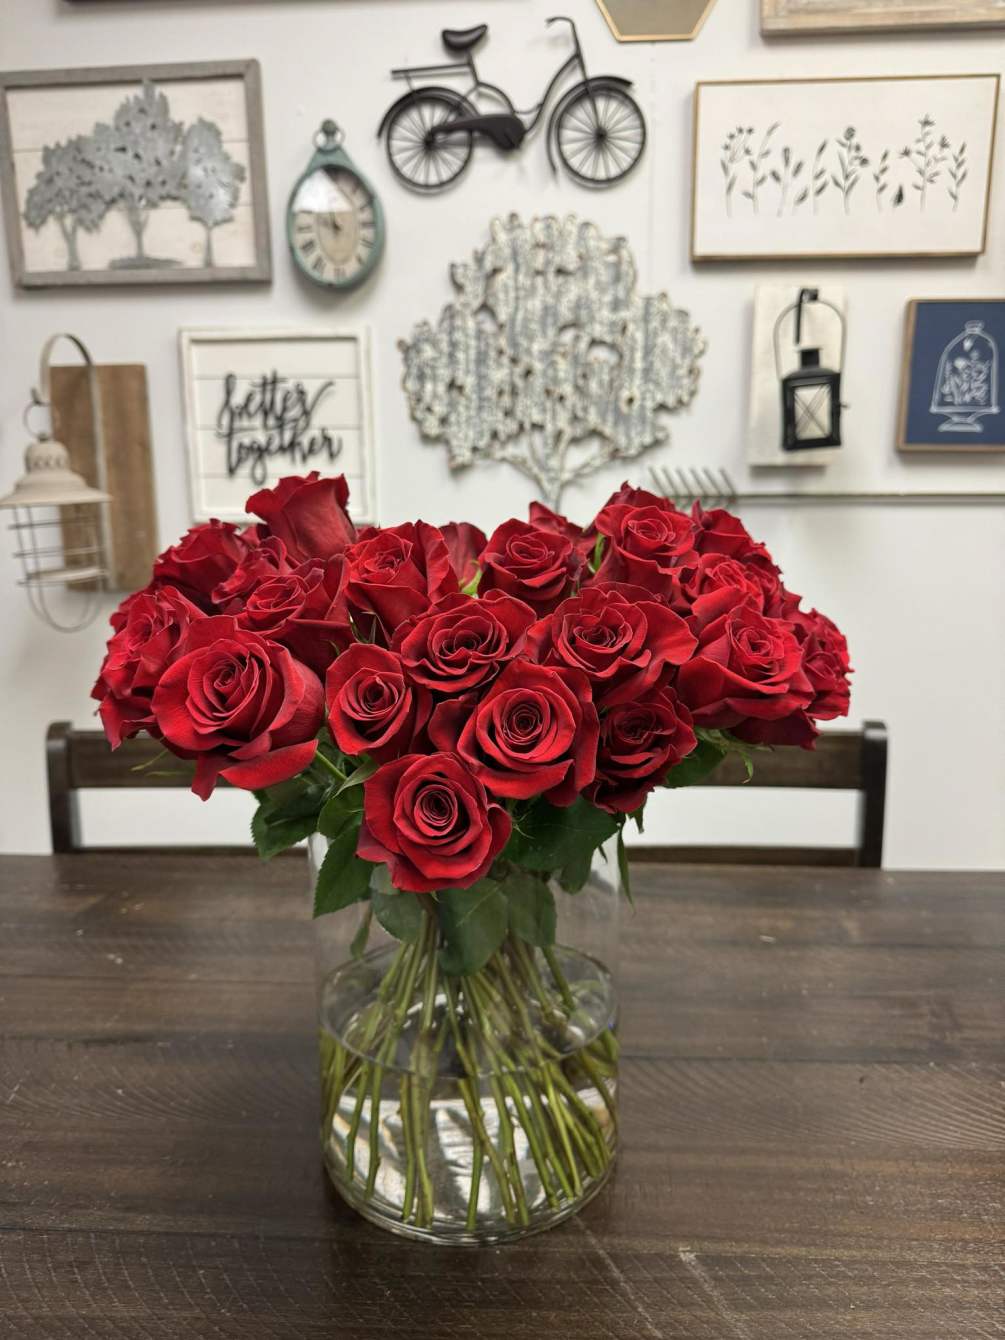 50 Red Roses arranged in a clear vase.